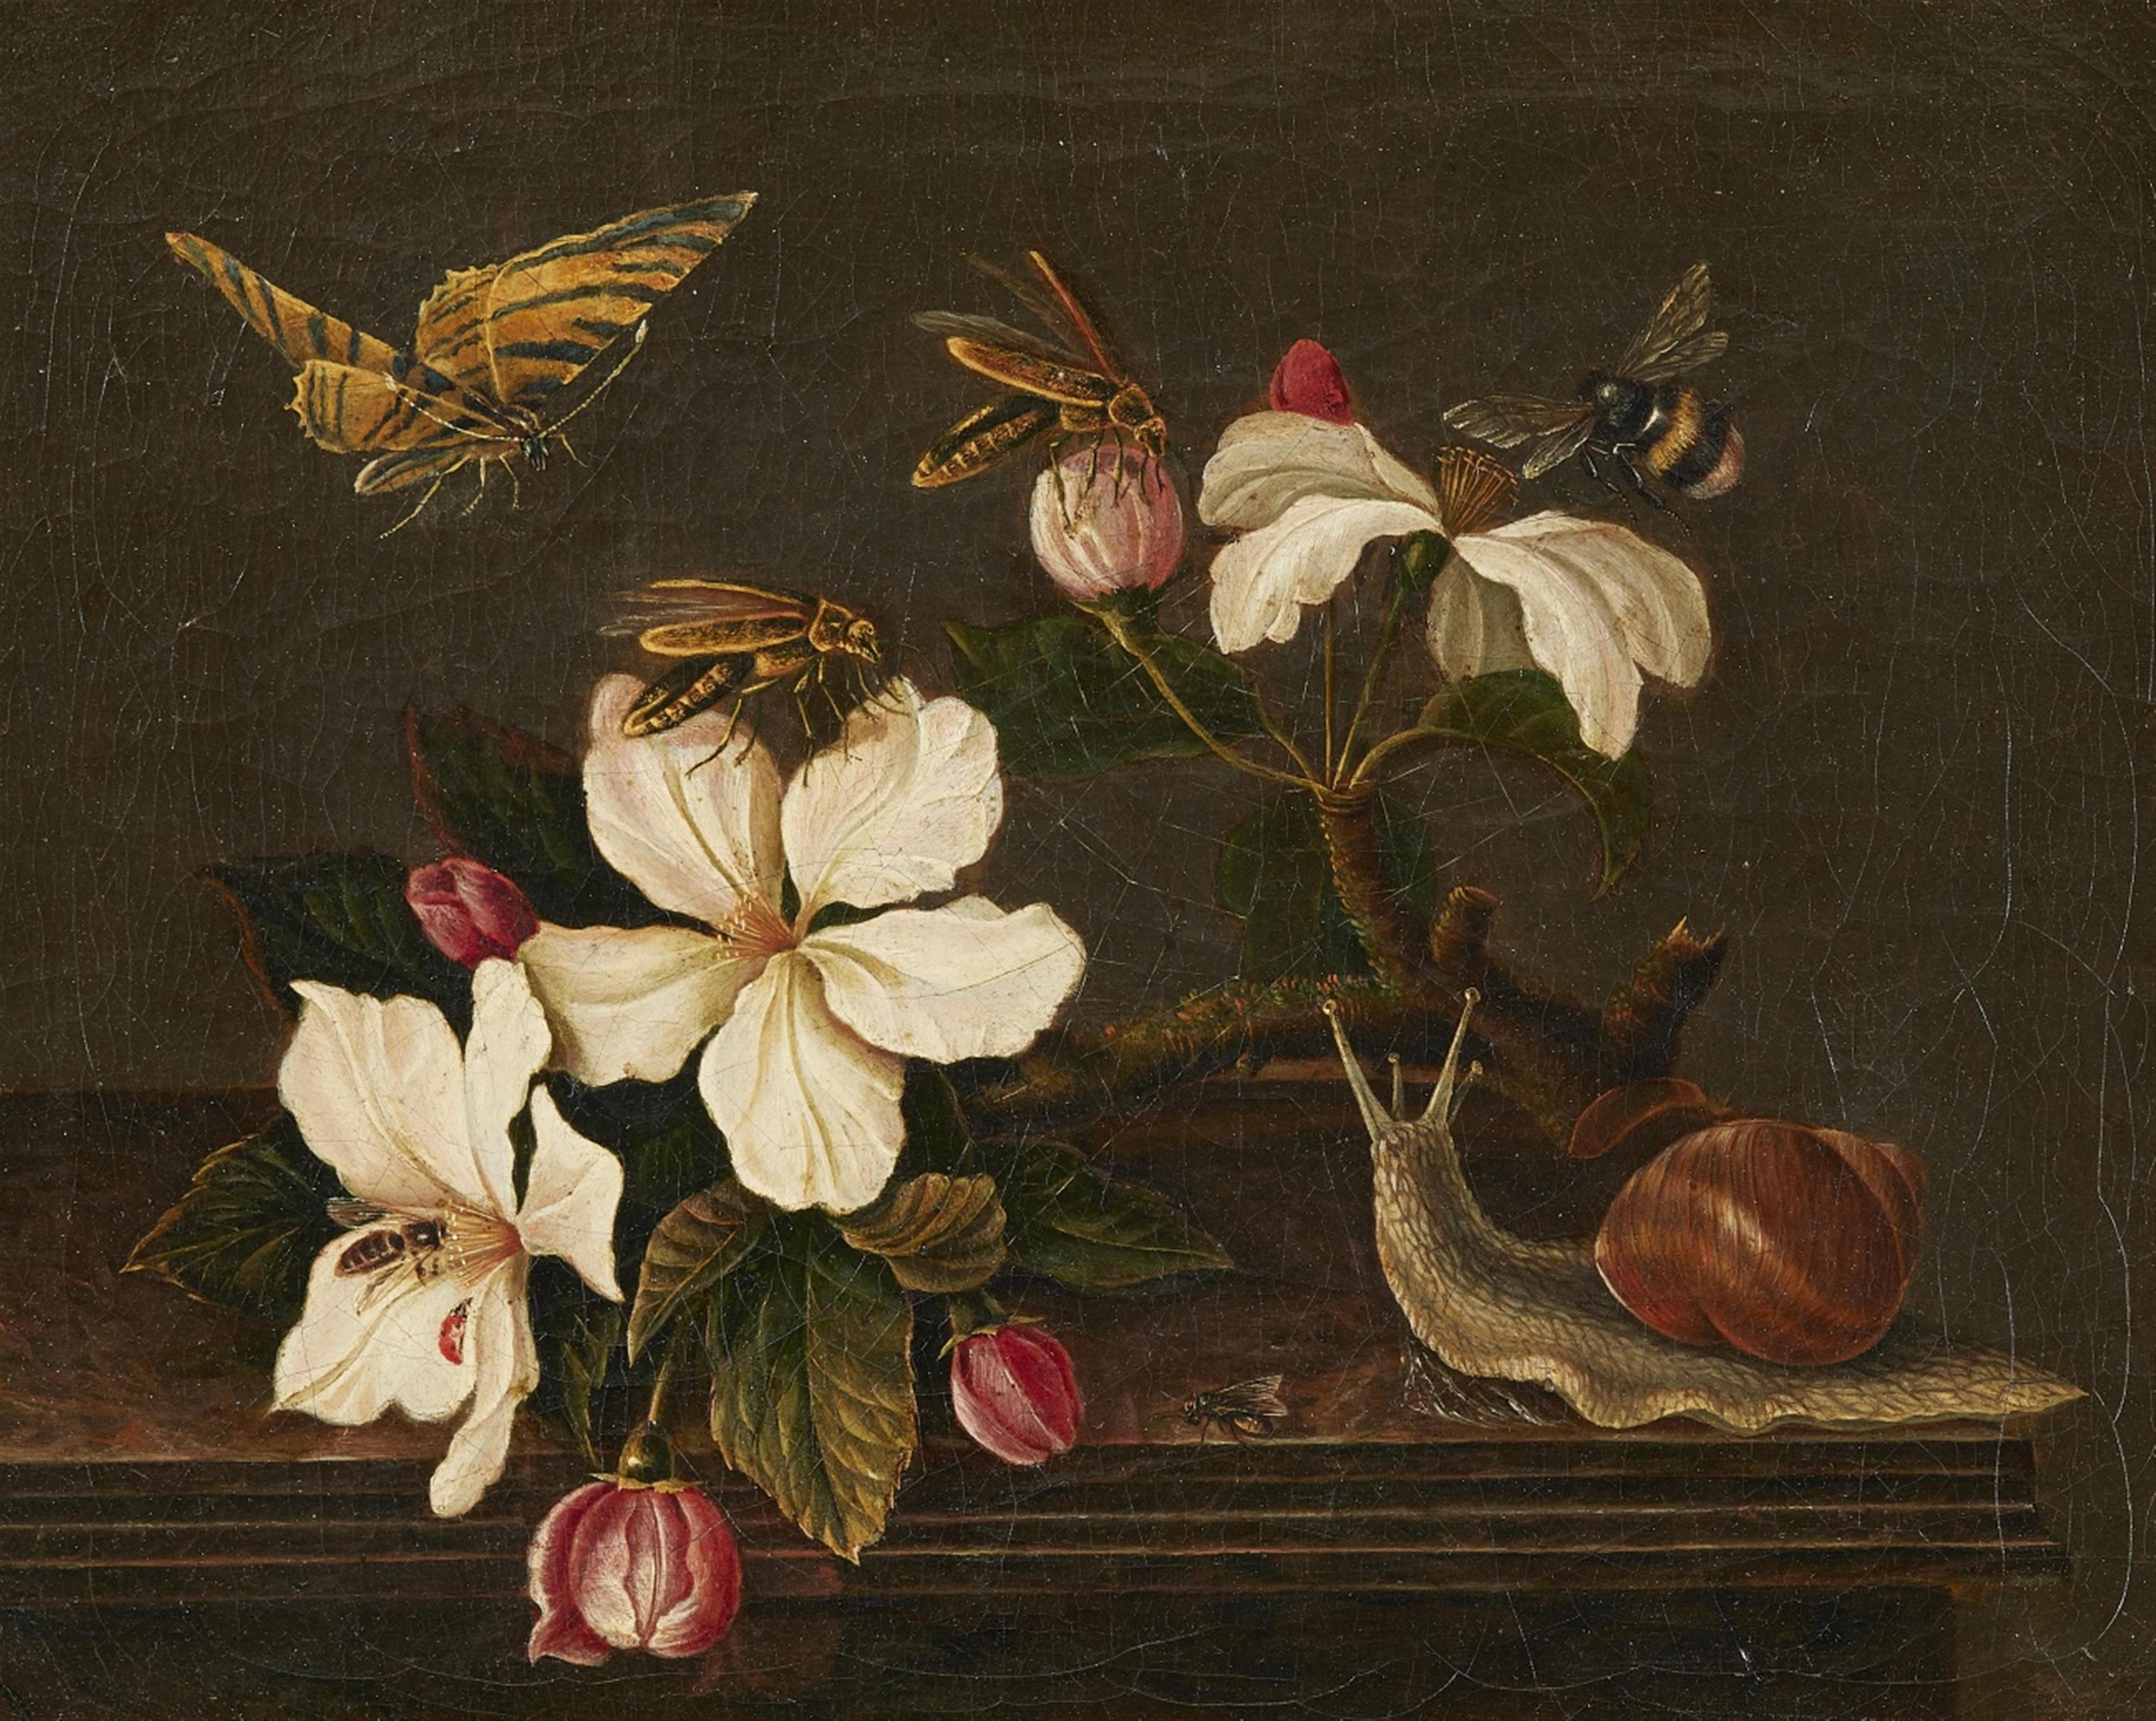 Unknown Artist 18th / 19th century - Still Life with a Flowering Branch, Snail, and Insects - image-1